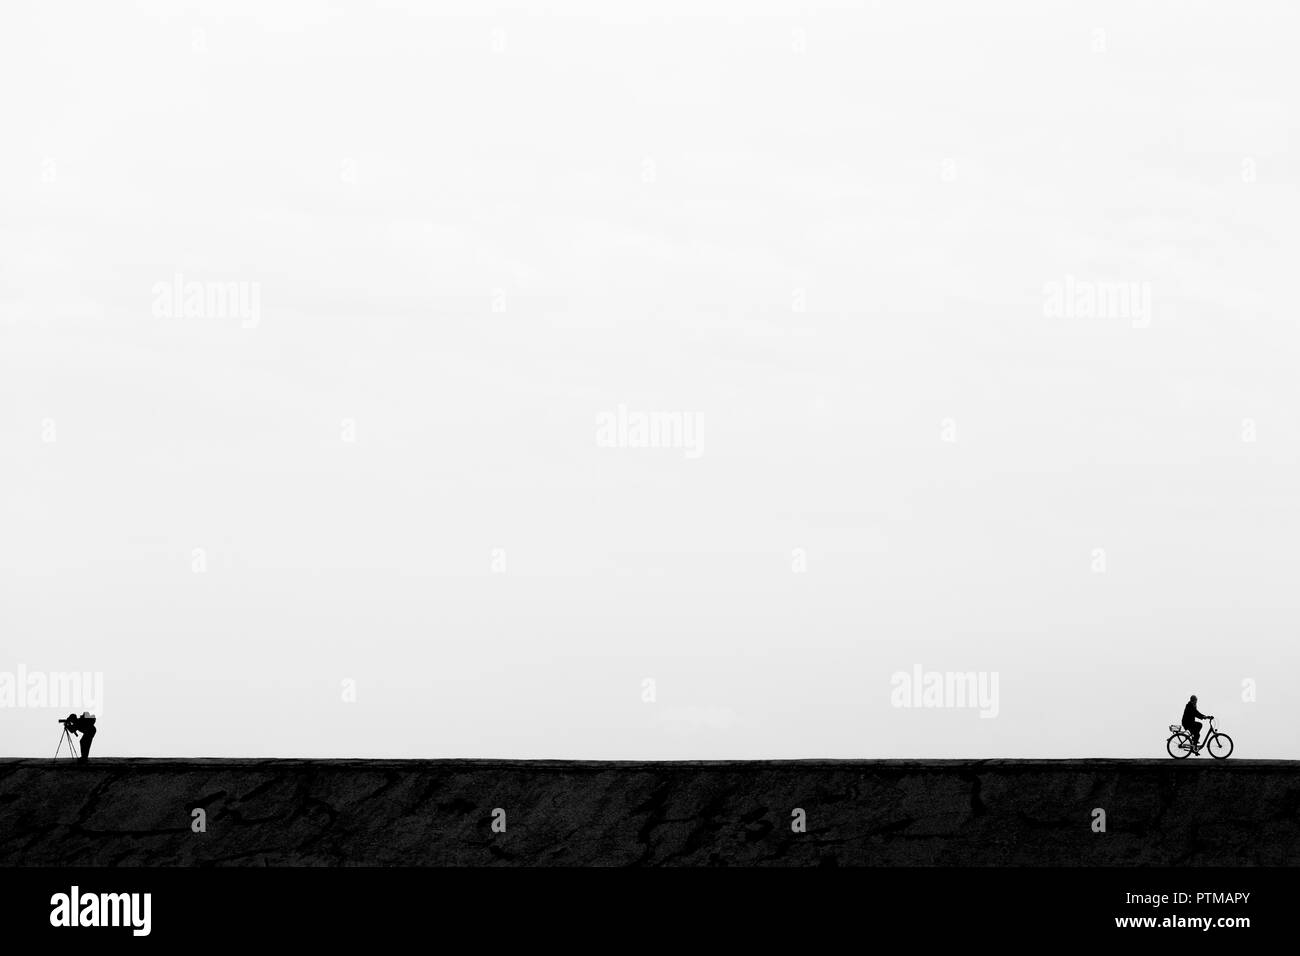 Minimal black and white landscape with a photographer and a cyclist Stock Photo